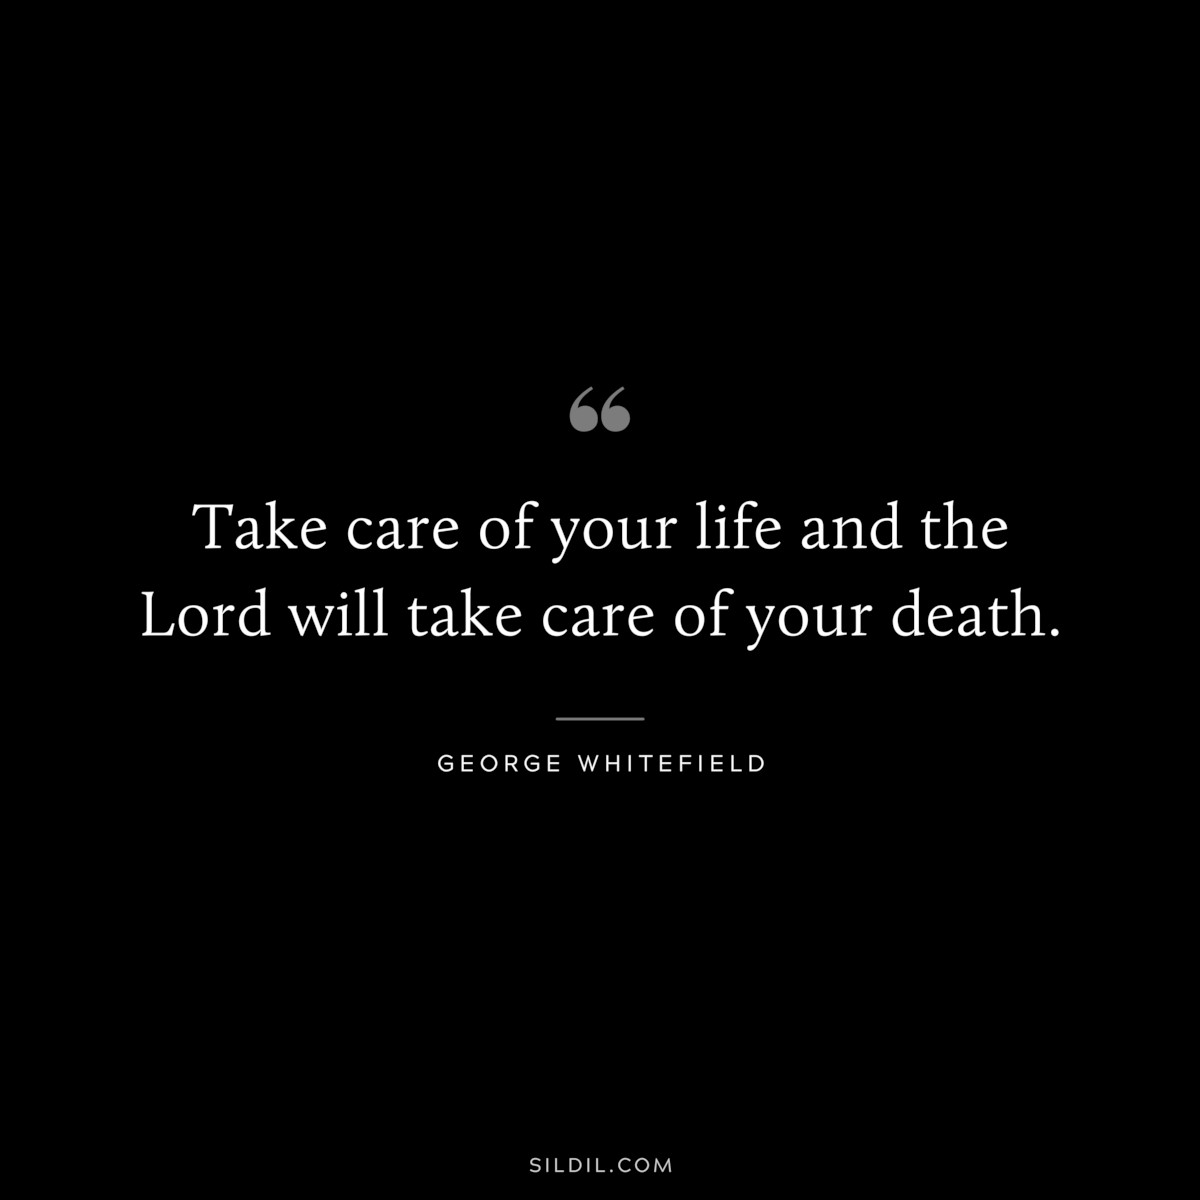 Take care of your life and the Lord will take care of your death. ― George Whitefield